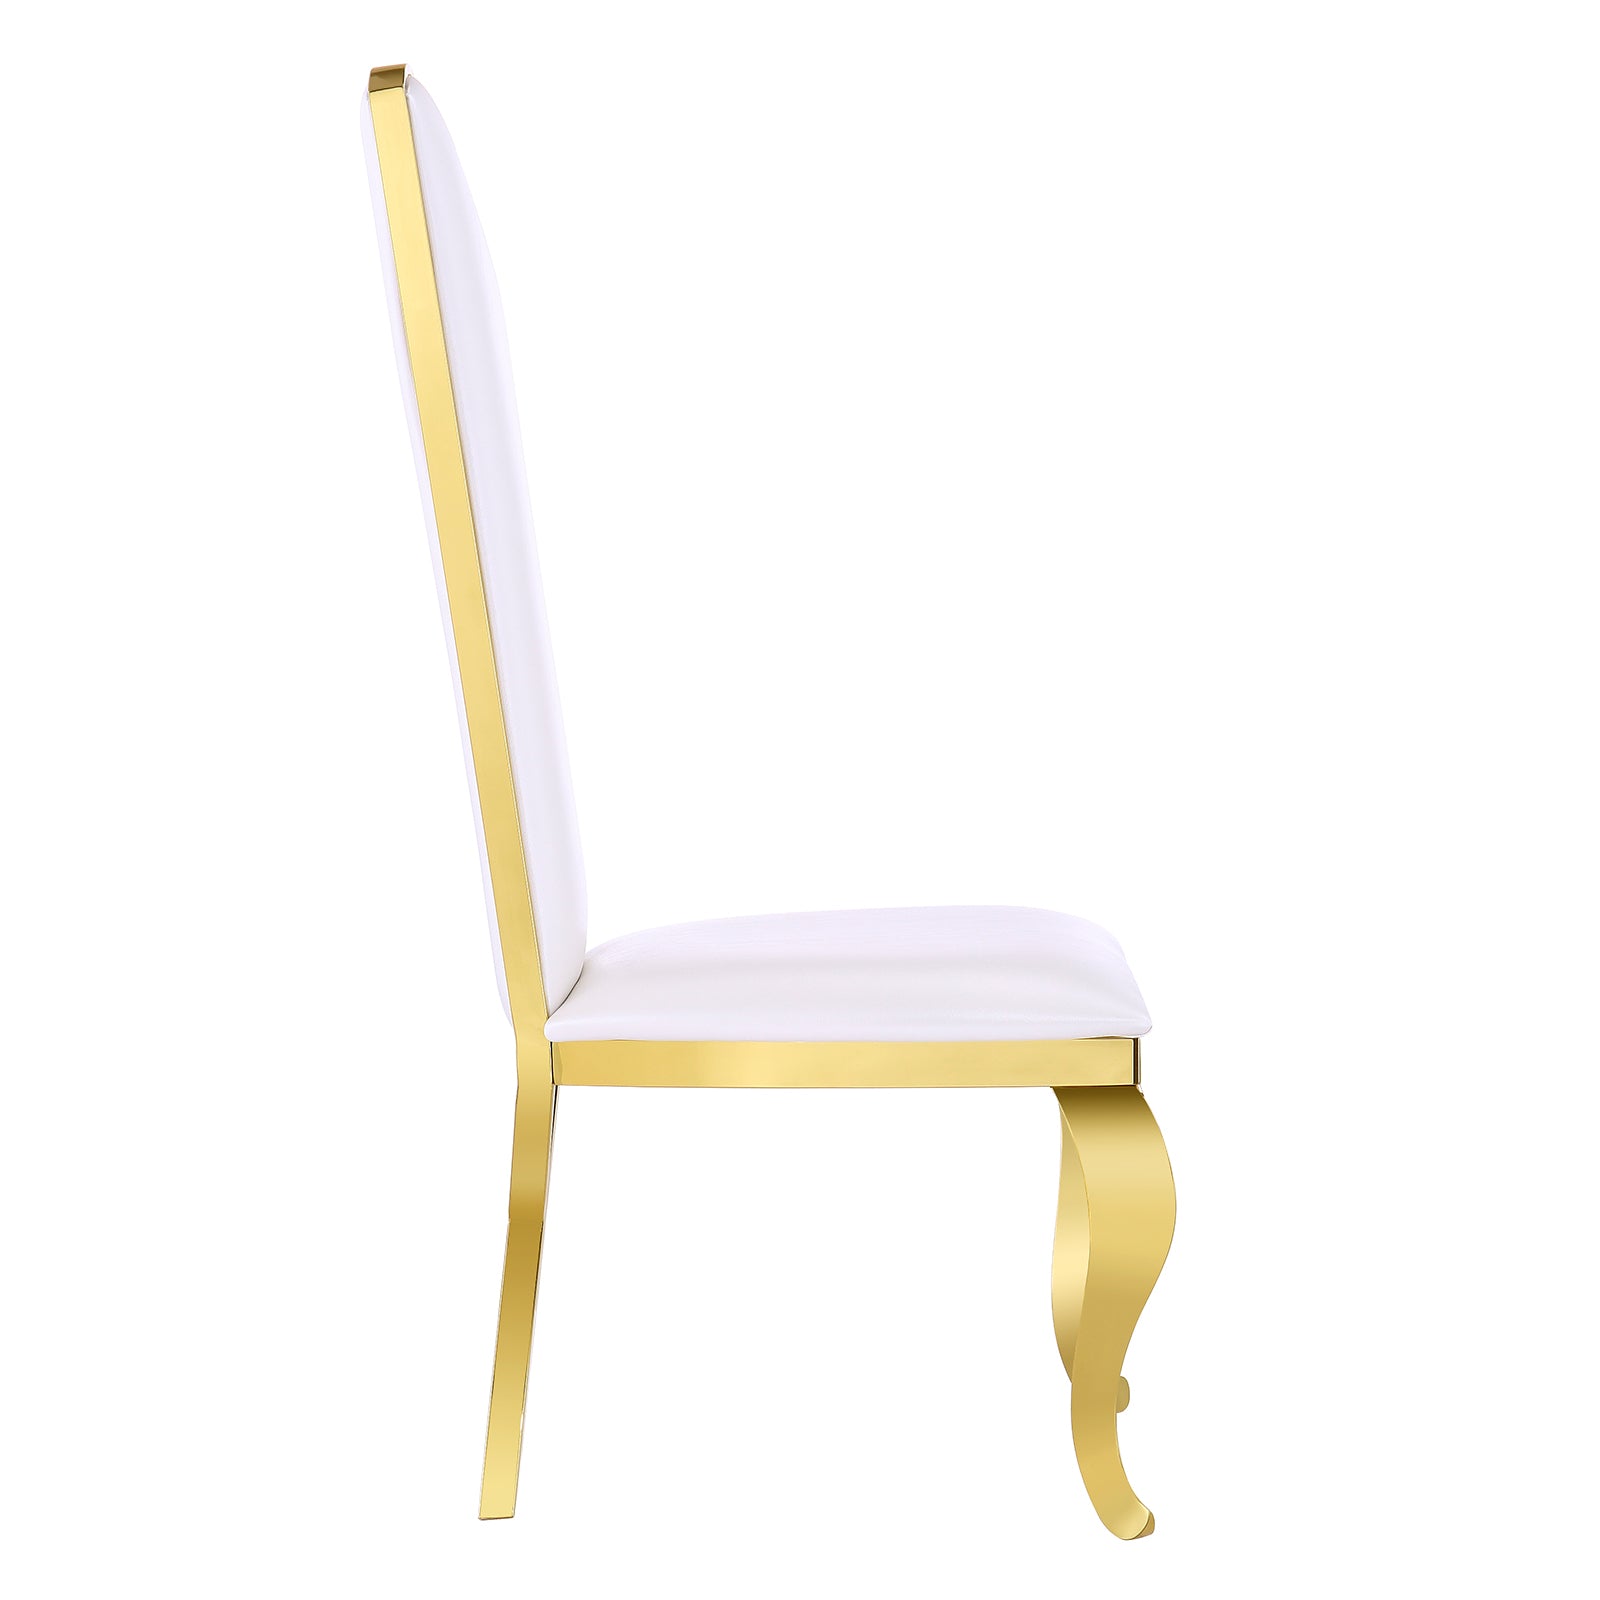 White Leather Upholstered Dining Chairs with Gorgeous Streamlined High Back and X-Shaped Metal Legs | C168